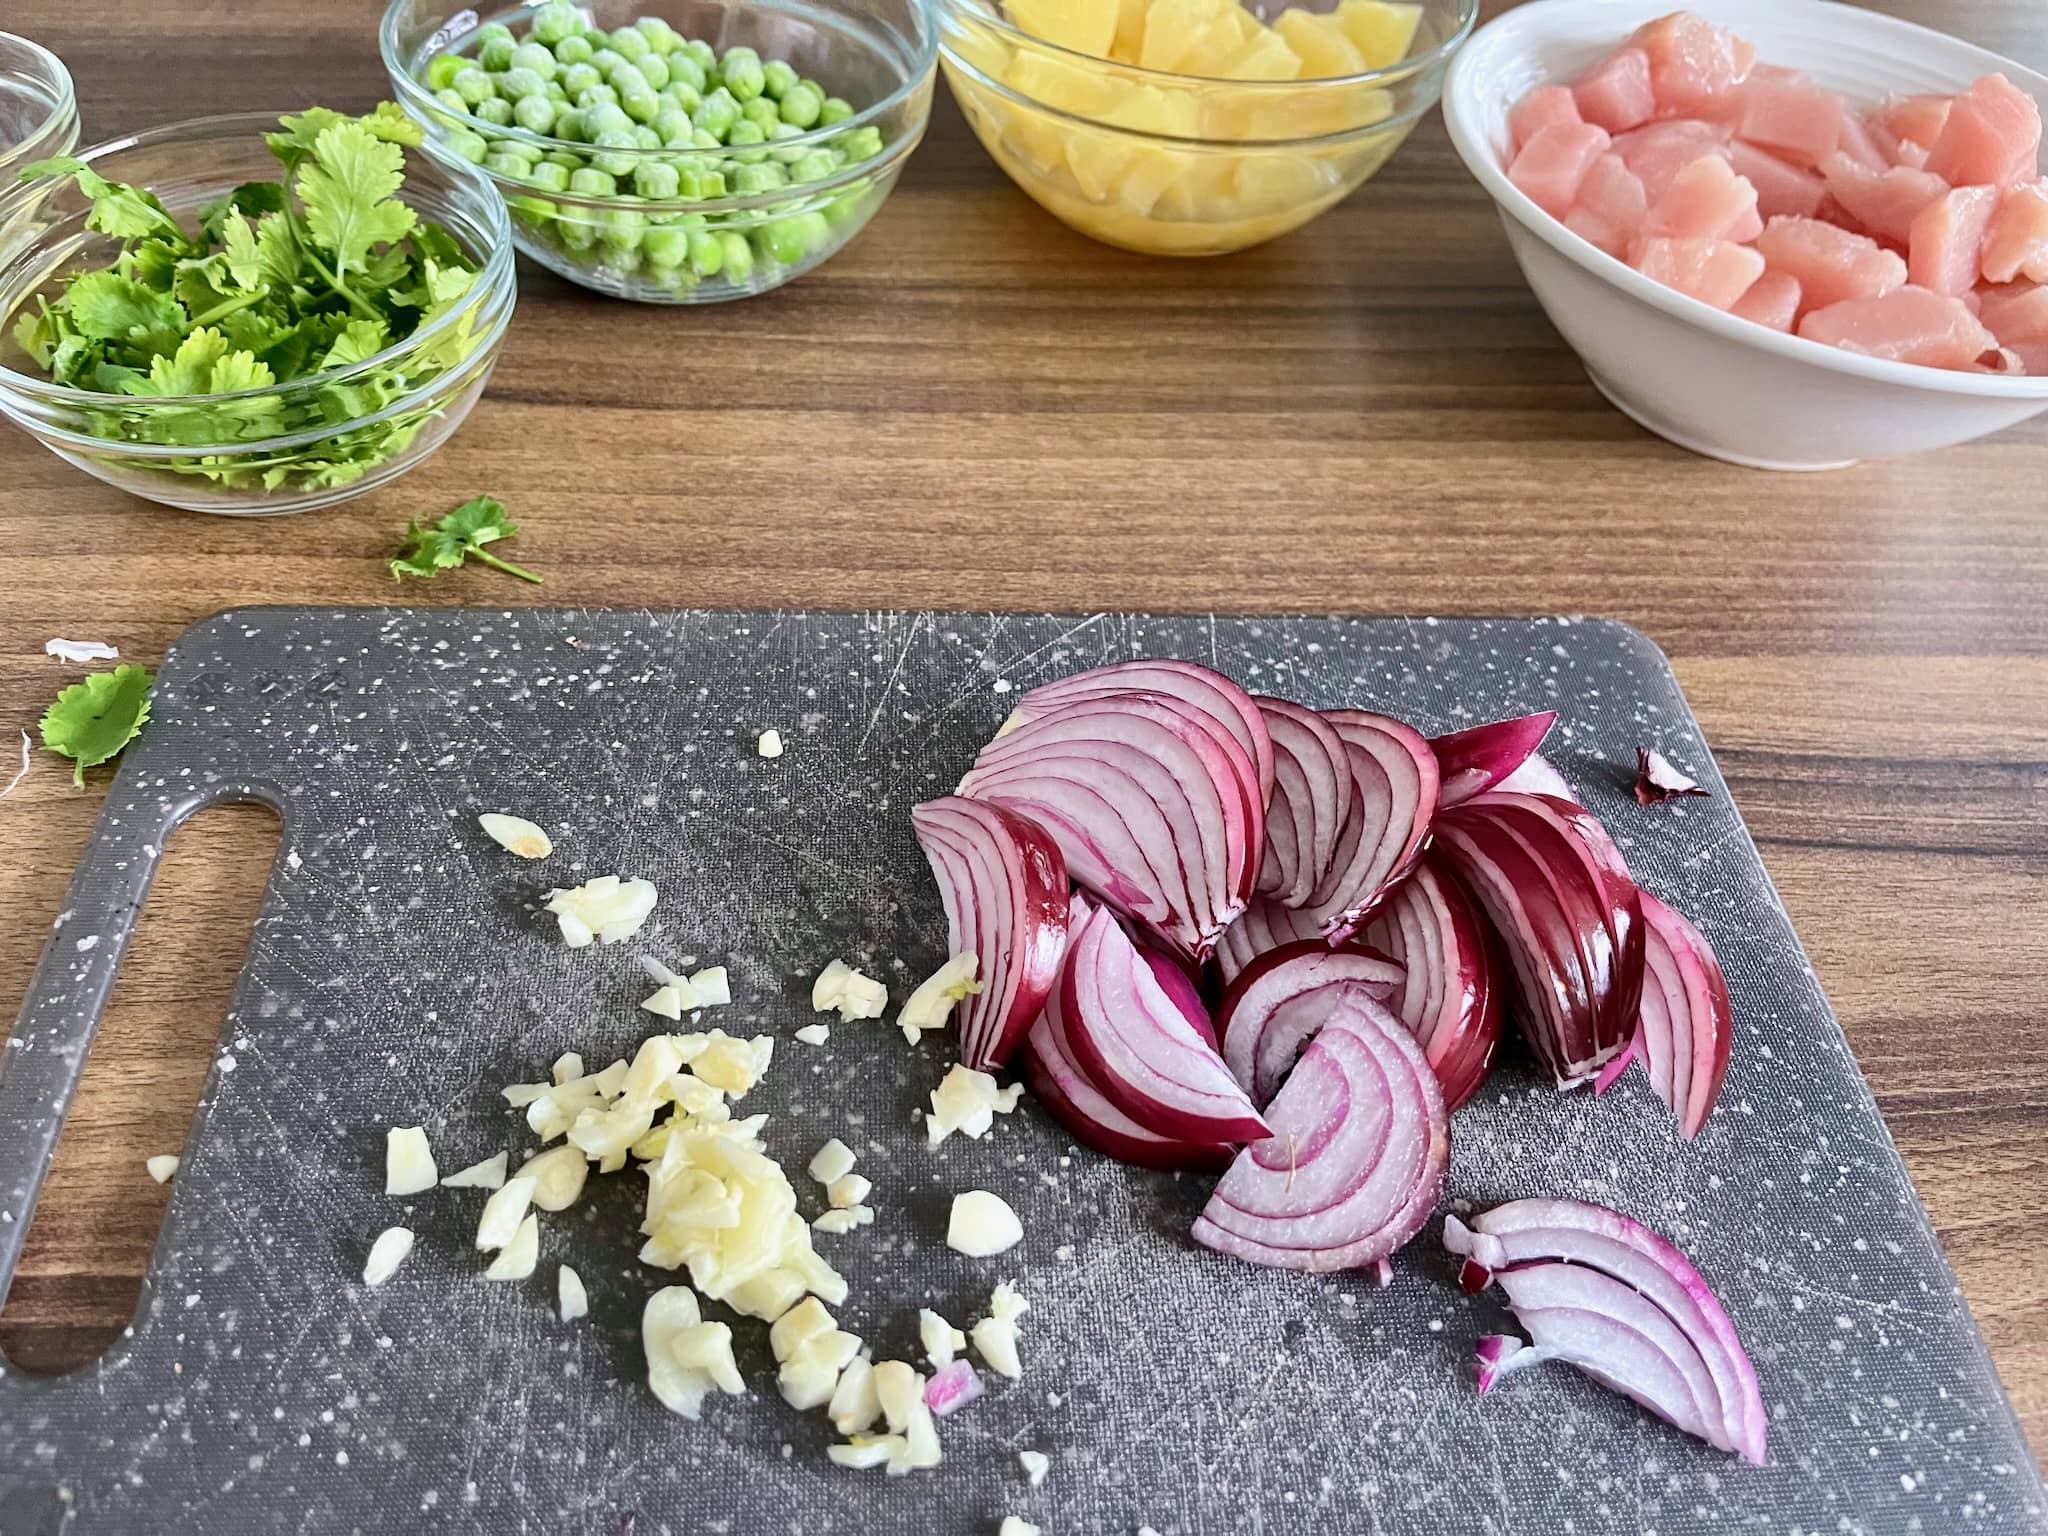 Chopped garlic and red onion sit on a cutting board